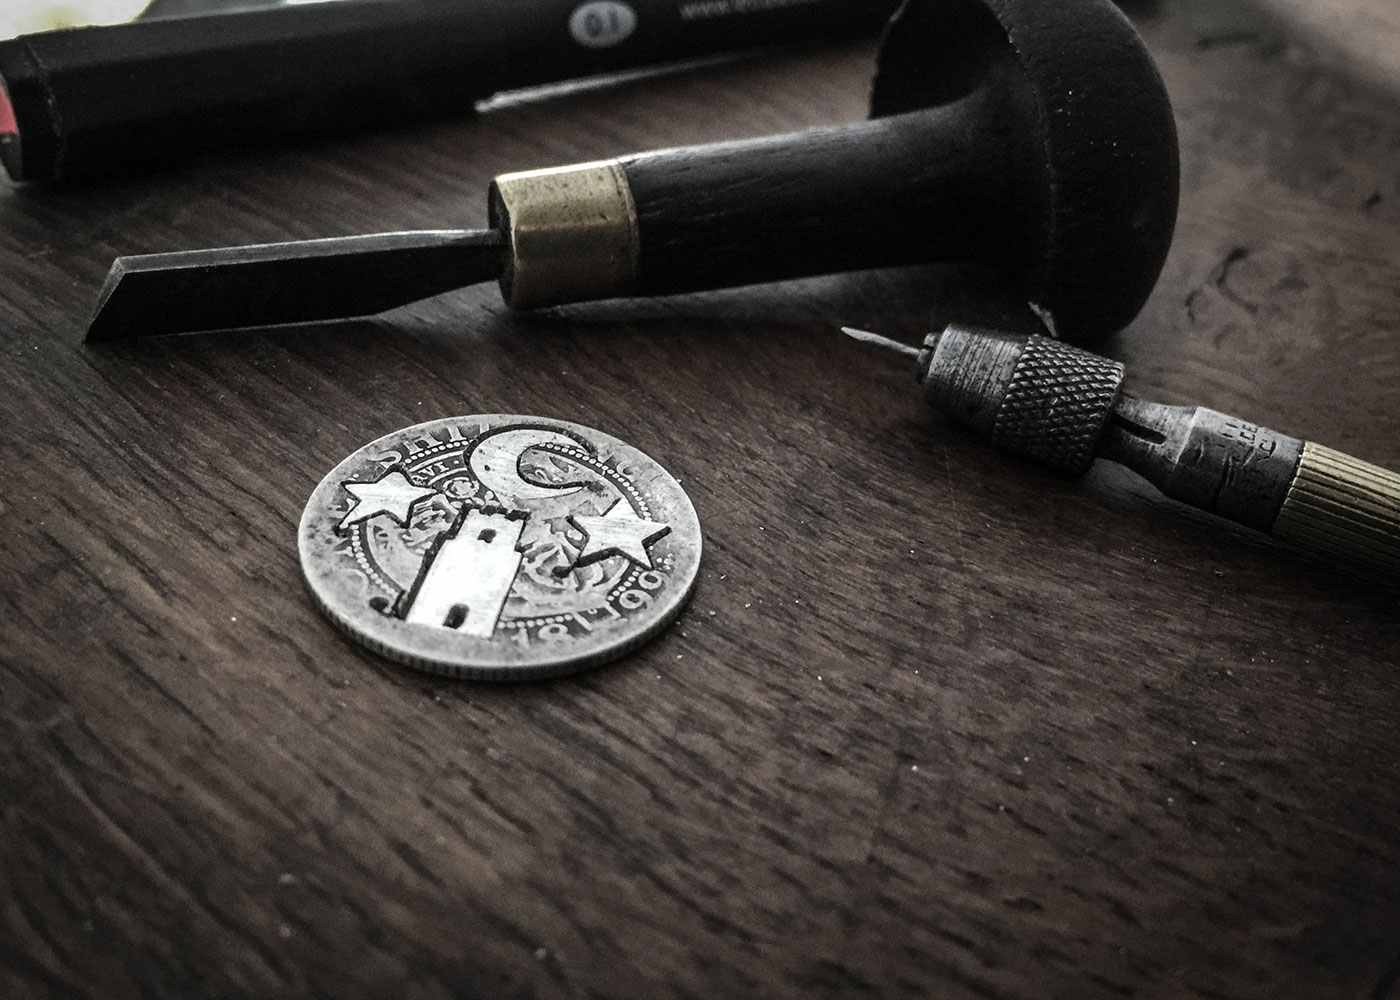 Glastonbury Tor earrings - handcrafted using traditional hand tools and techniques.  Handmade from recycled silver shillings.